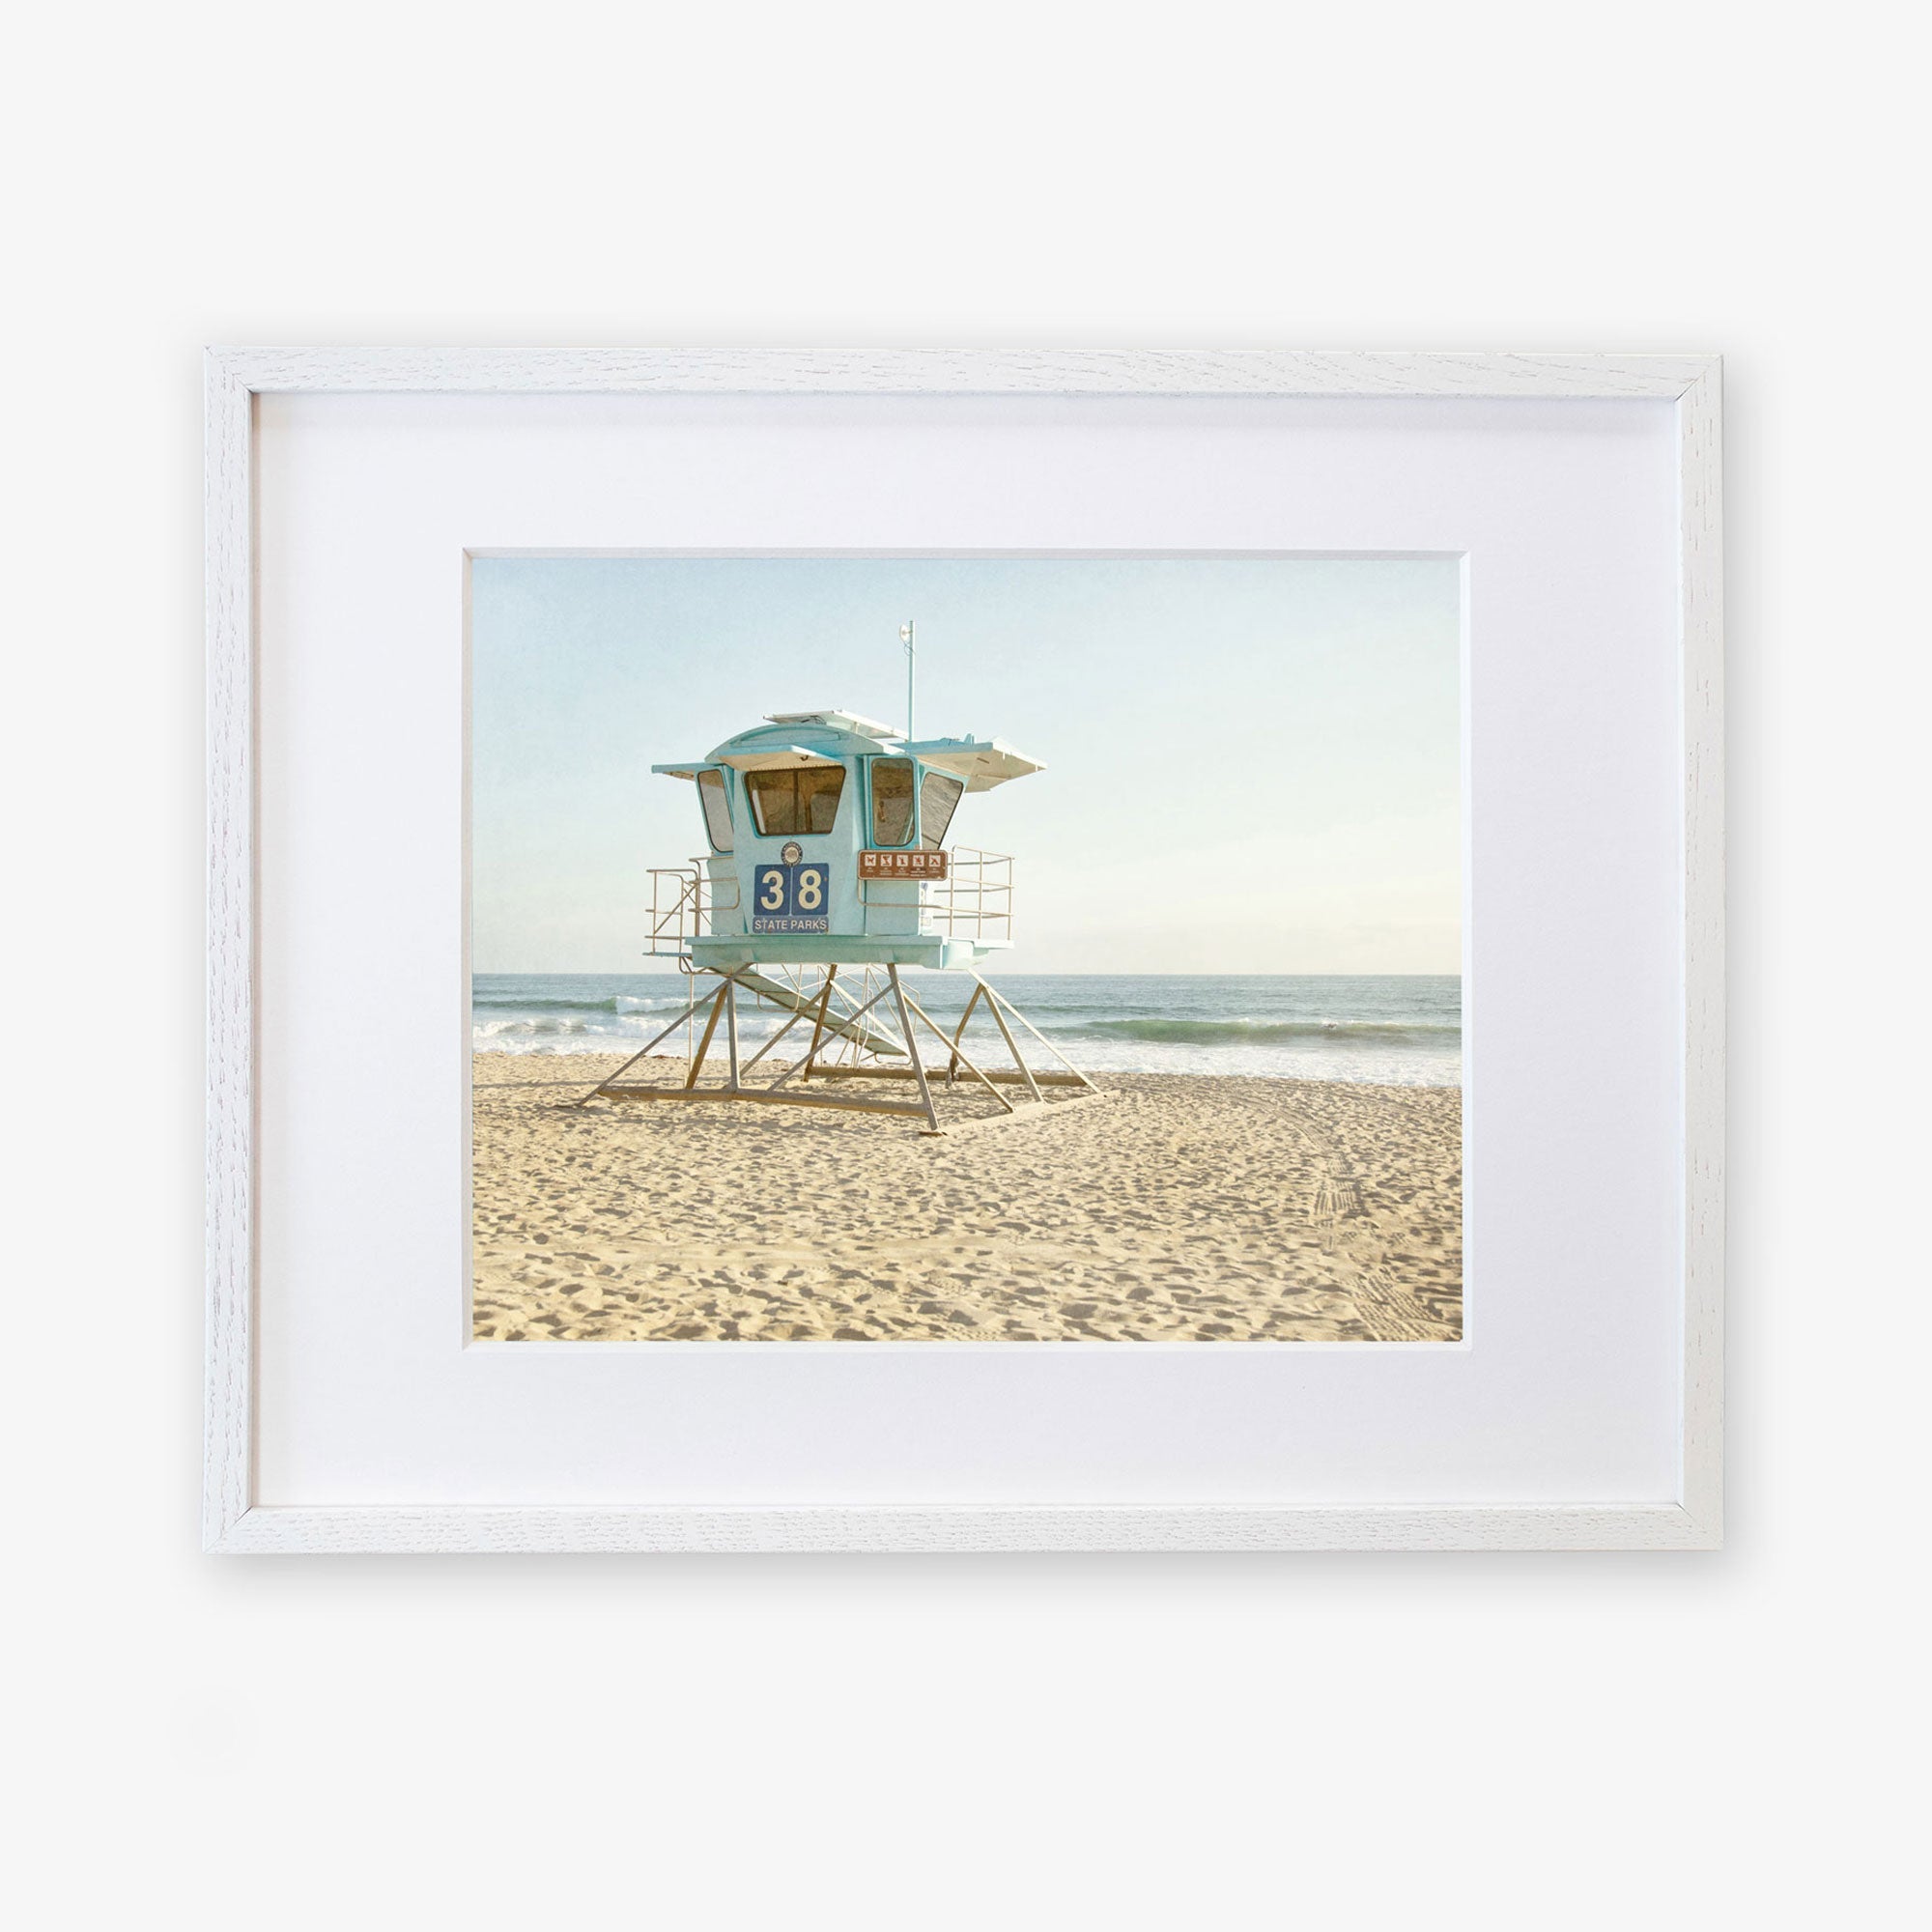 An unframed photograph of a lifeguard tower numbered 38 on a sandy beach, with the ocean in the background under a clear sky. The Offley Green 'California Coastal Print, Carlsbad Lifeguard Tower' exemplifies a serene beach setting.